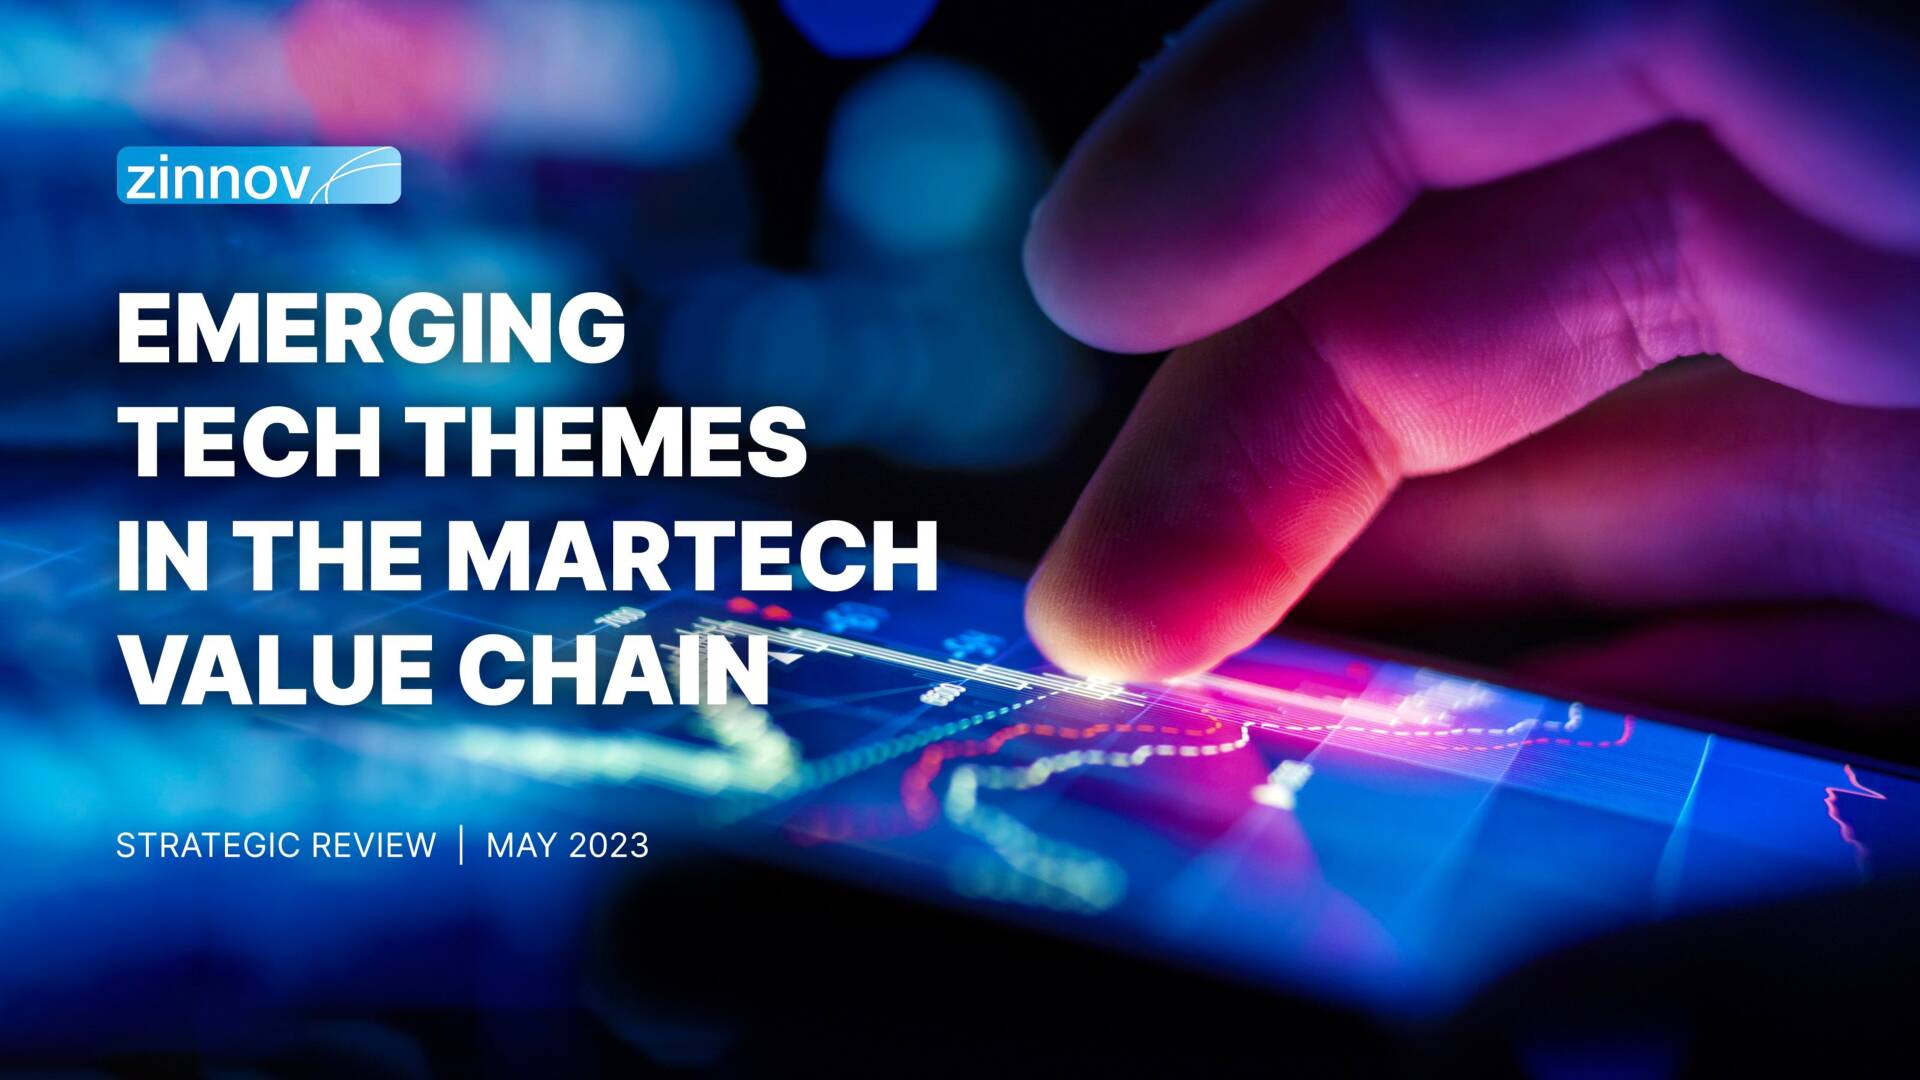 Zinnov Emerging Tech Themes In The Martech Value Chain Report1